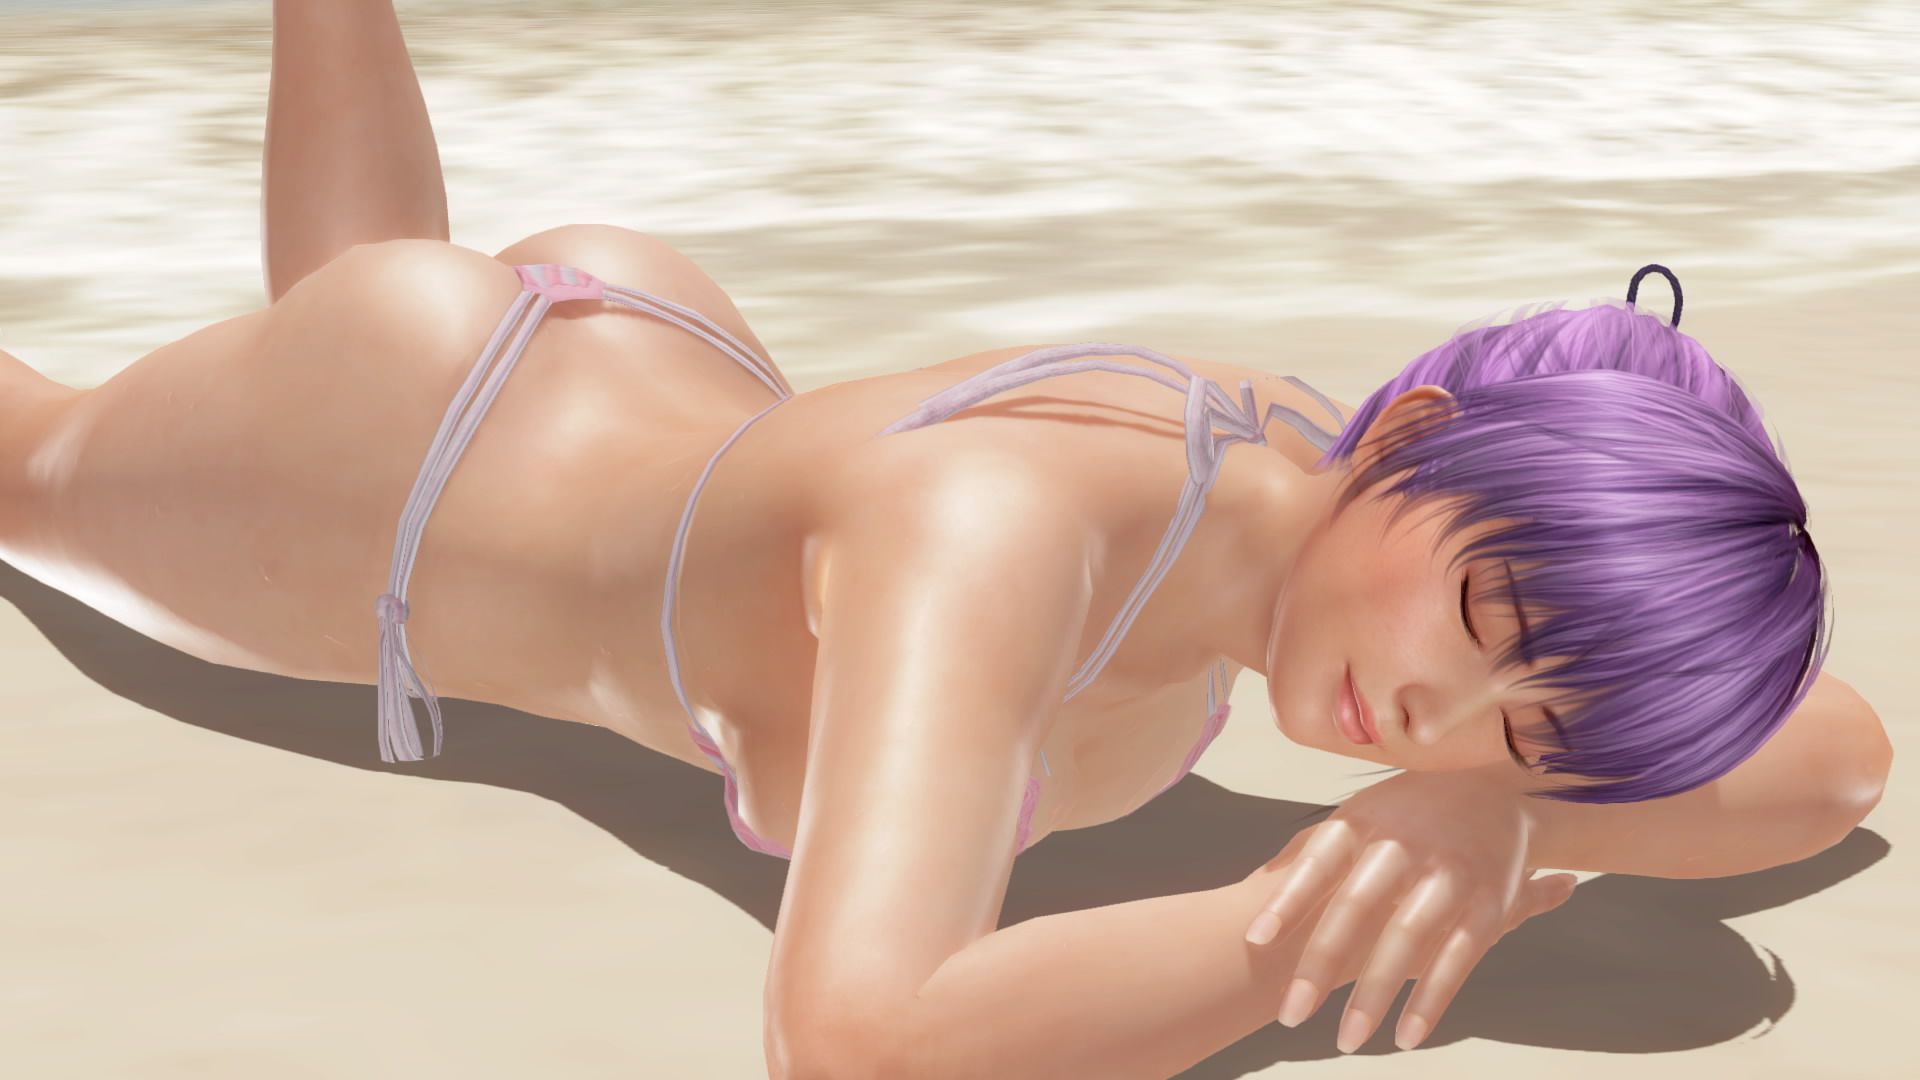 Doax3 "The color which suits the Aya-chan is pink" theory is verified 4